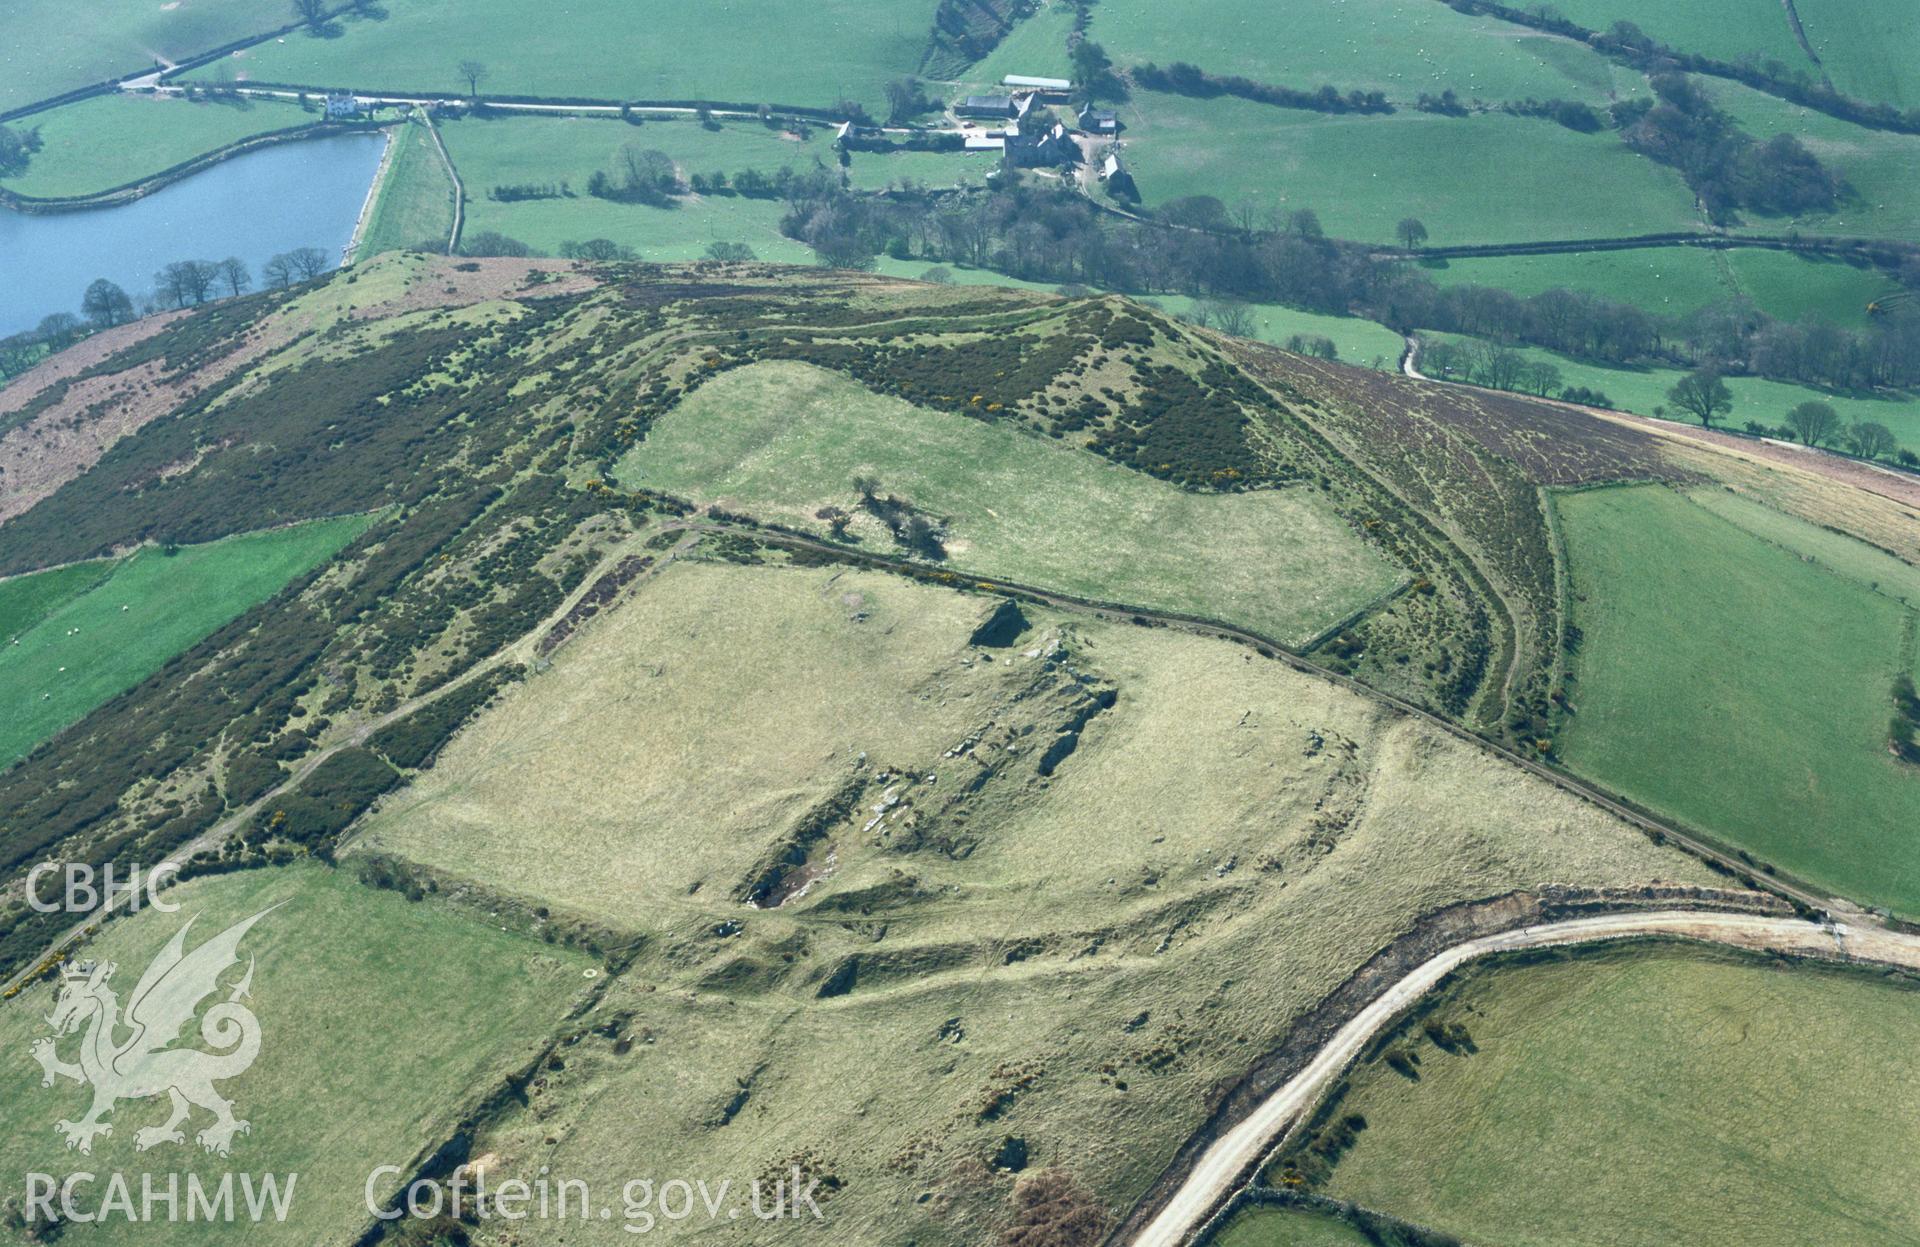 RCAHMW colour oblique aerial photograph of Mynydd y Gaer, hillfort. Taken by Toby Driver on 08/04/2003